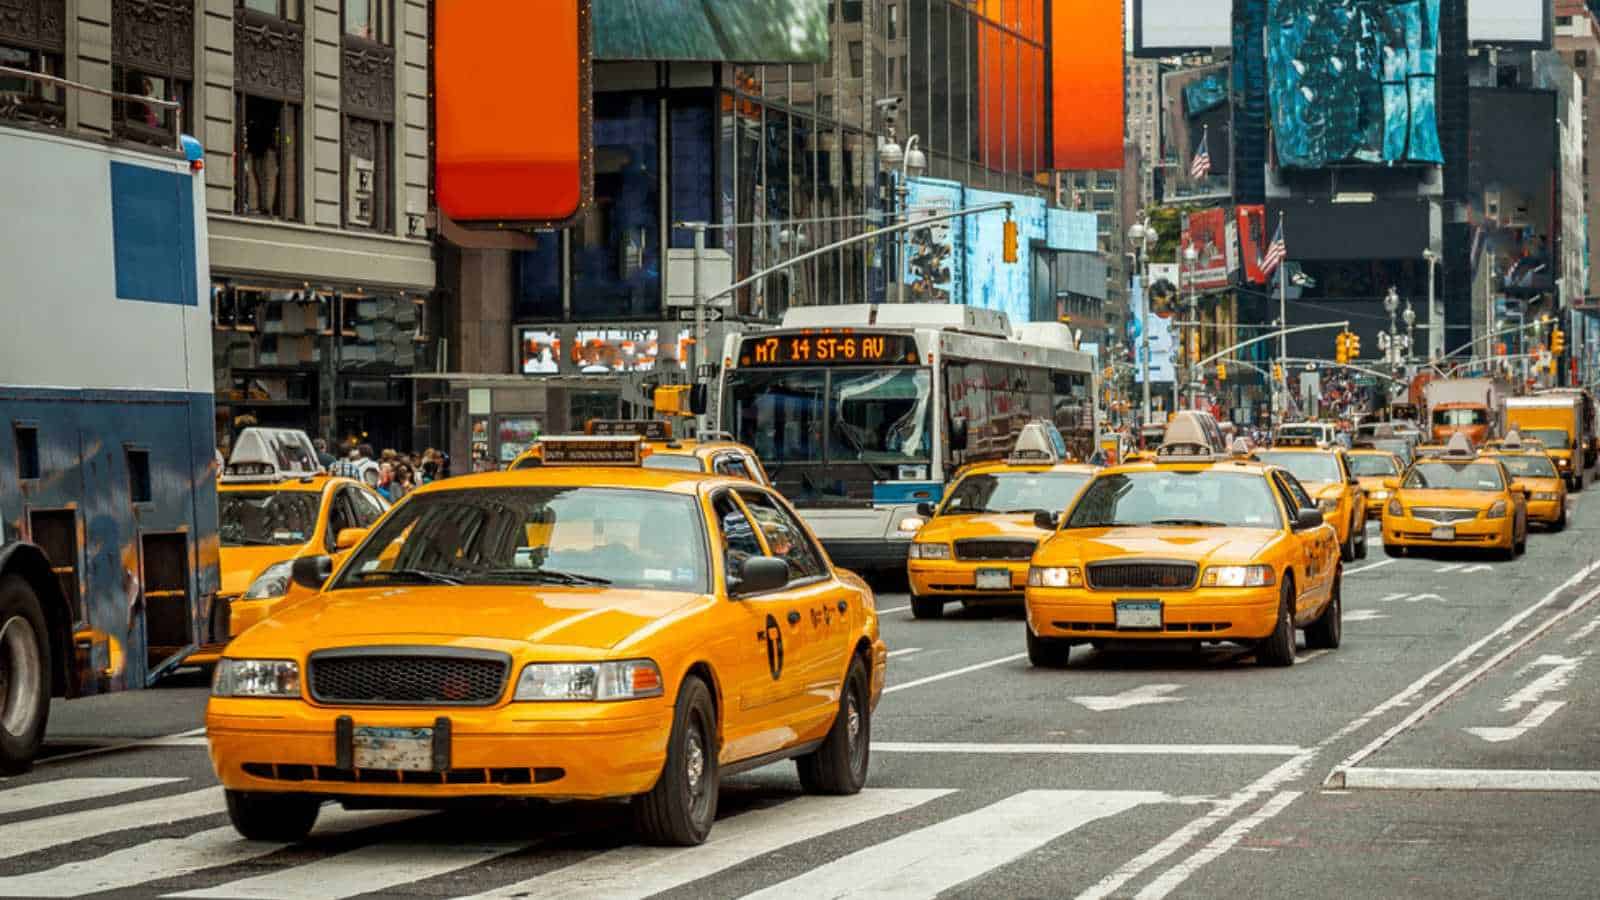 NYC Cabs,Taxi,New York, America, Times Square, USA
